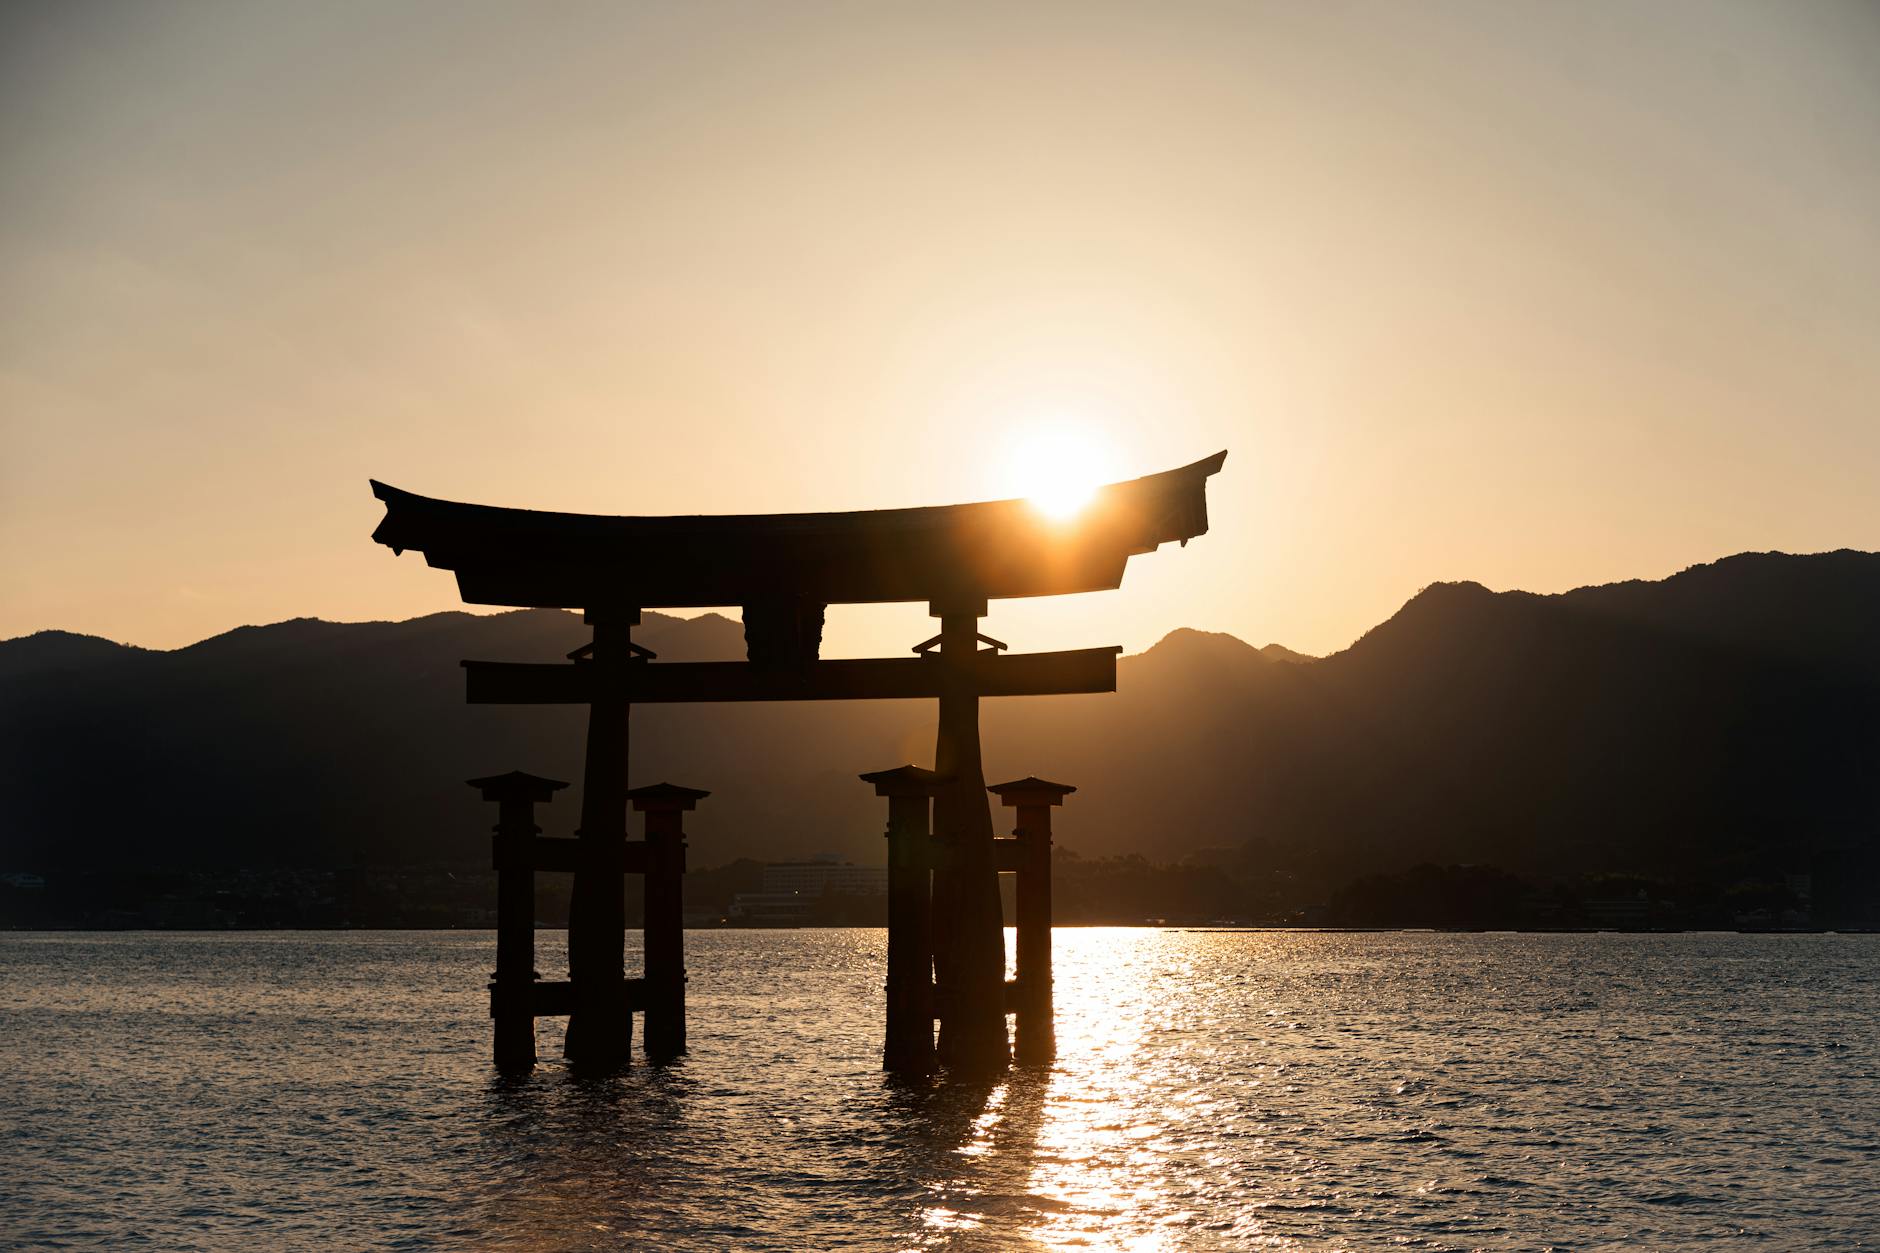 A Silhouette of the Itsukushima Shrine in Japan